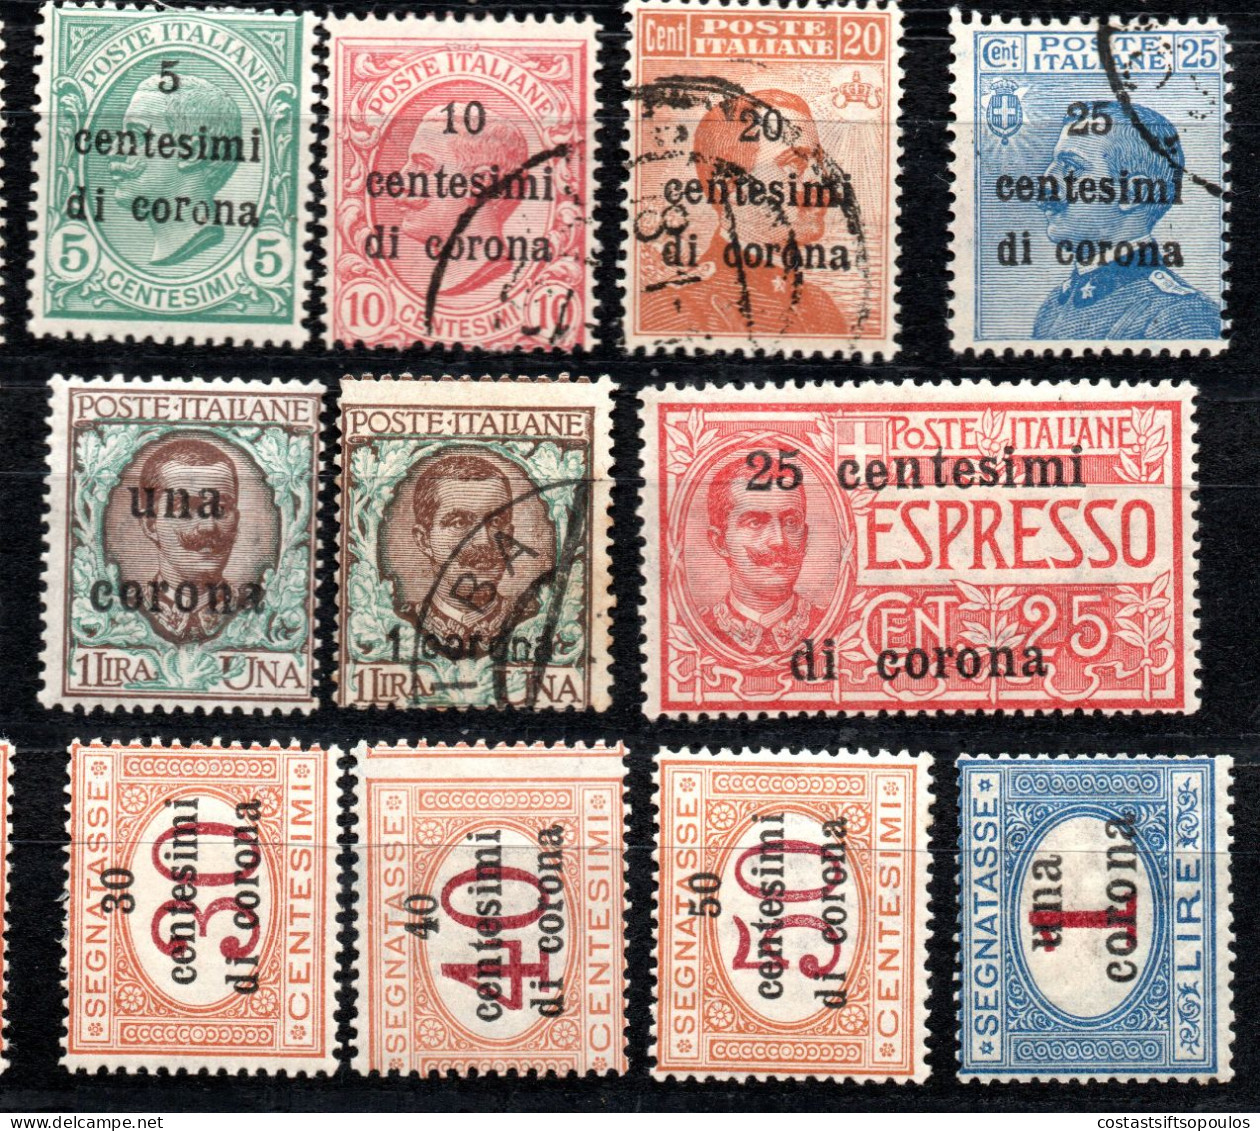 2145.AUSTRIA. ITALY. TRENTINO 1919-1920 41 ST. LOT.POSSIBLY SOME NOT GENUINE. GENERALLY GOOD CONDITION - Ocupación Austriaca